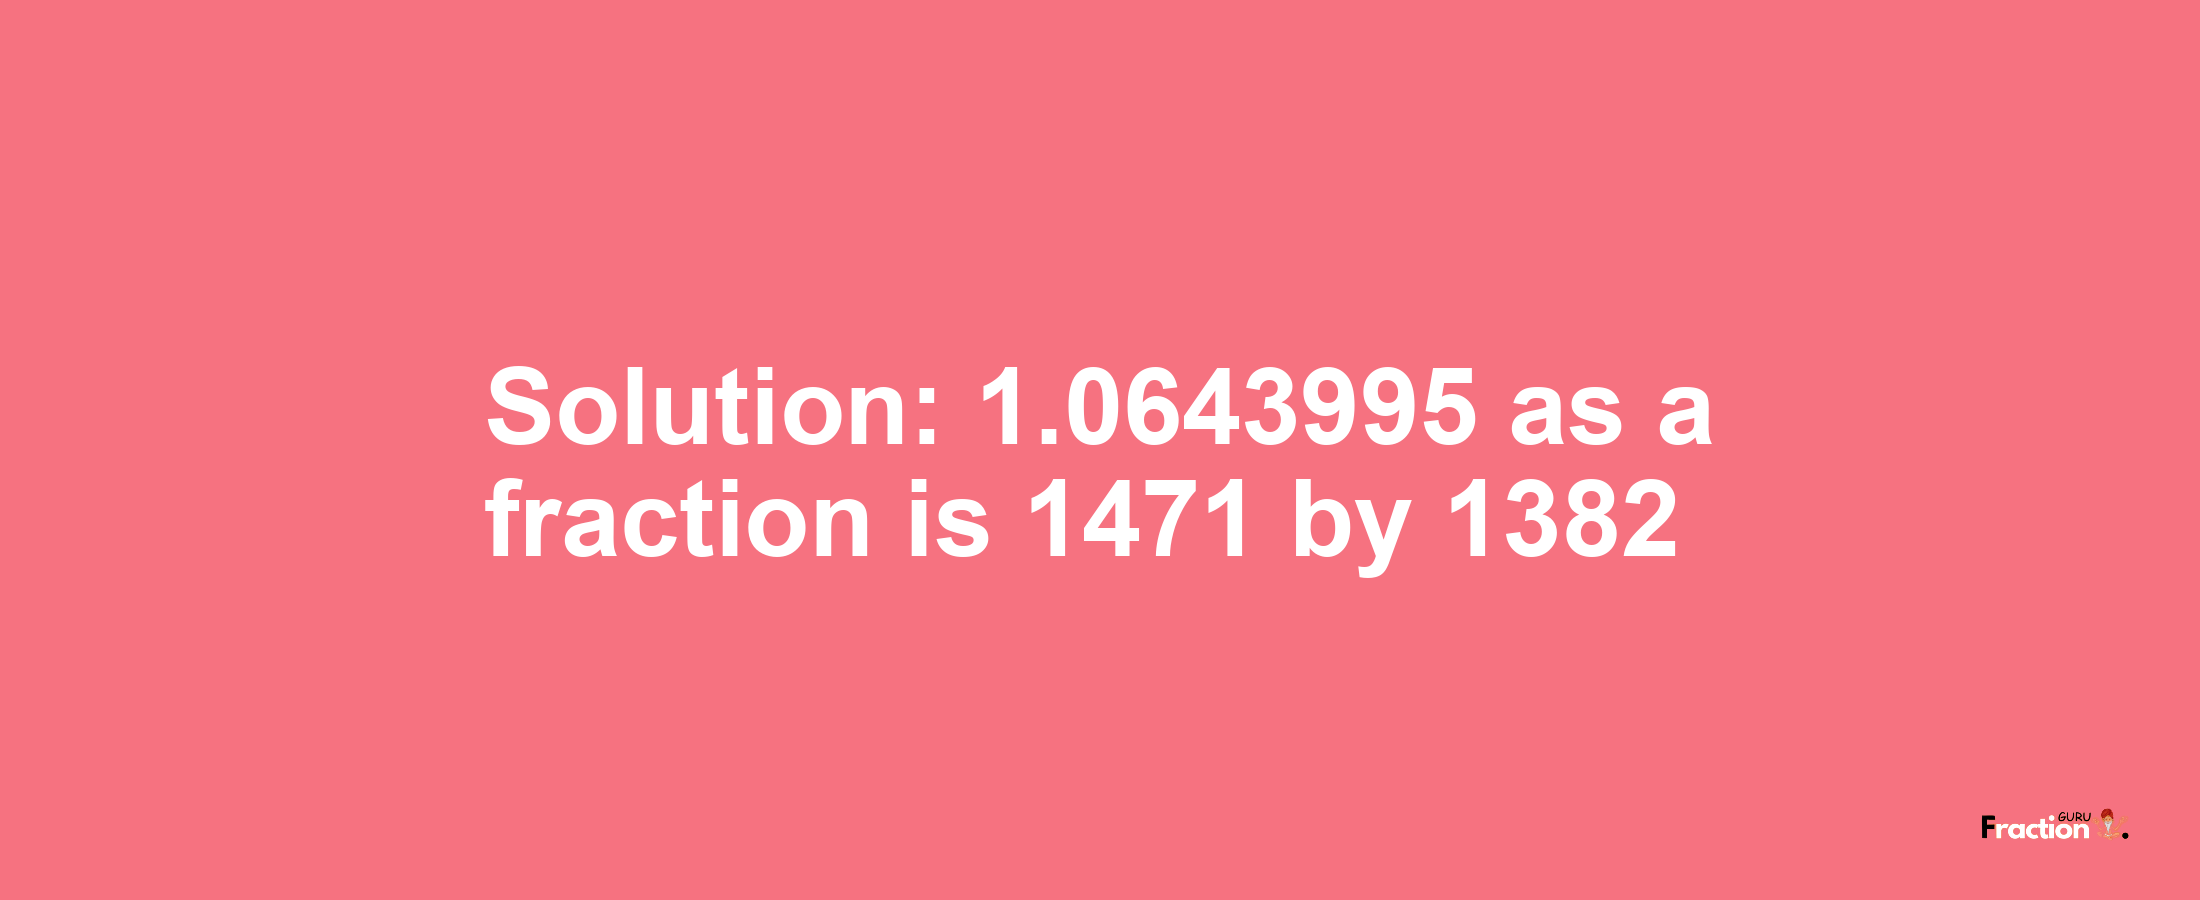 Solution:1.0643995 as a fraction is 1471/1382